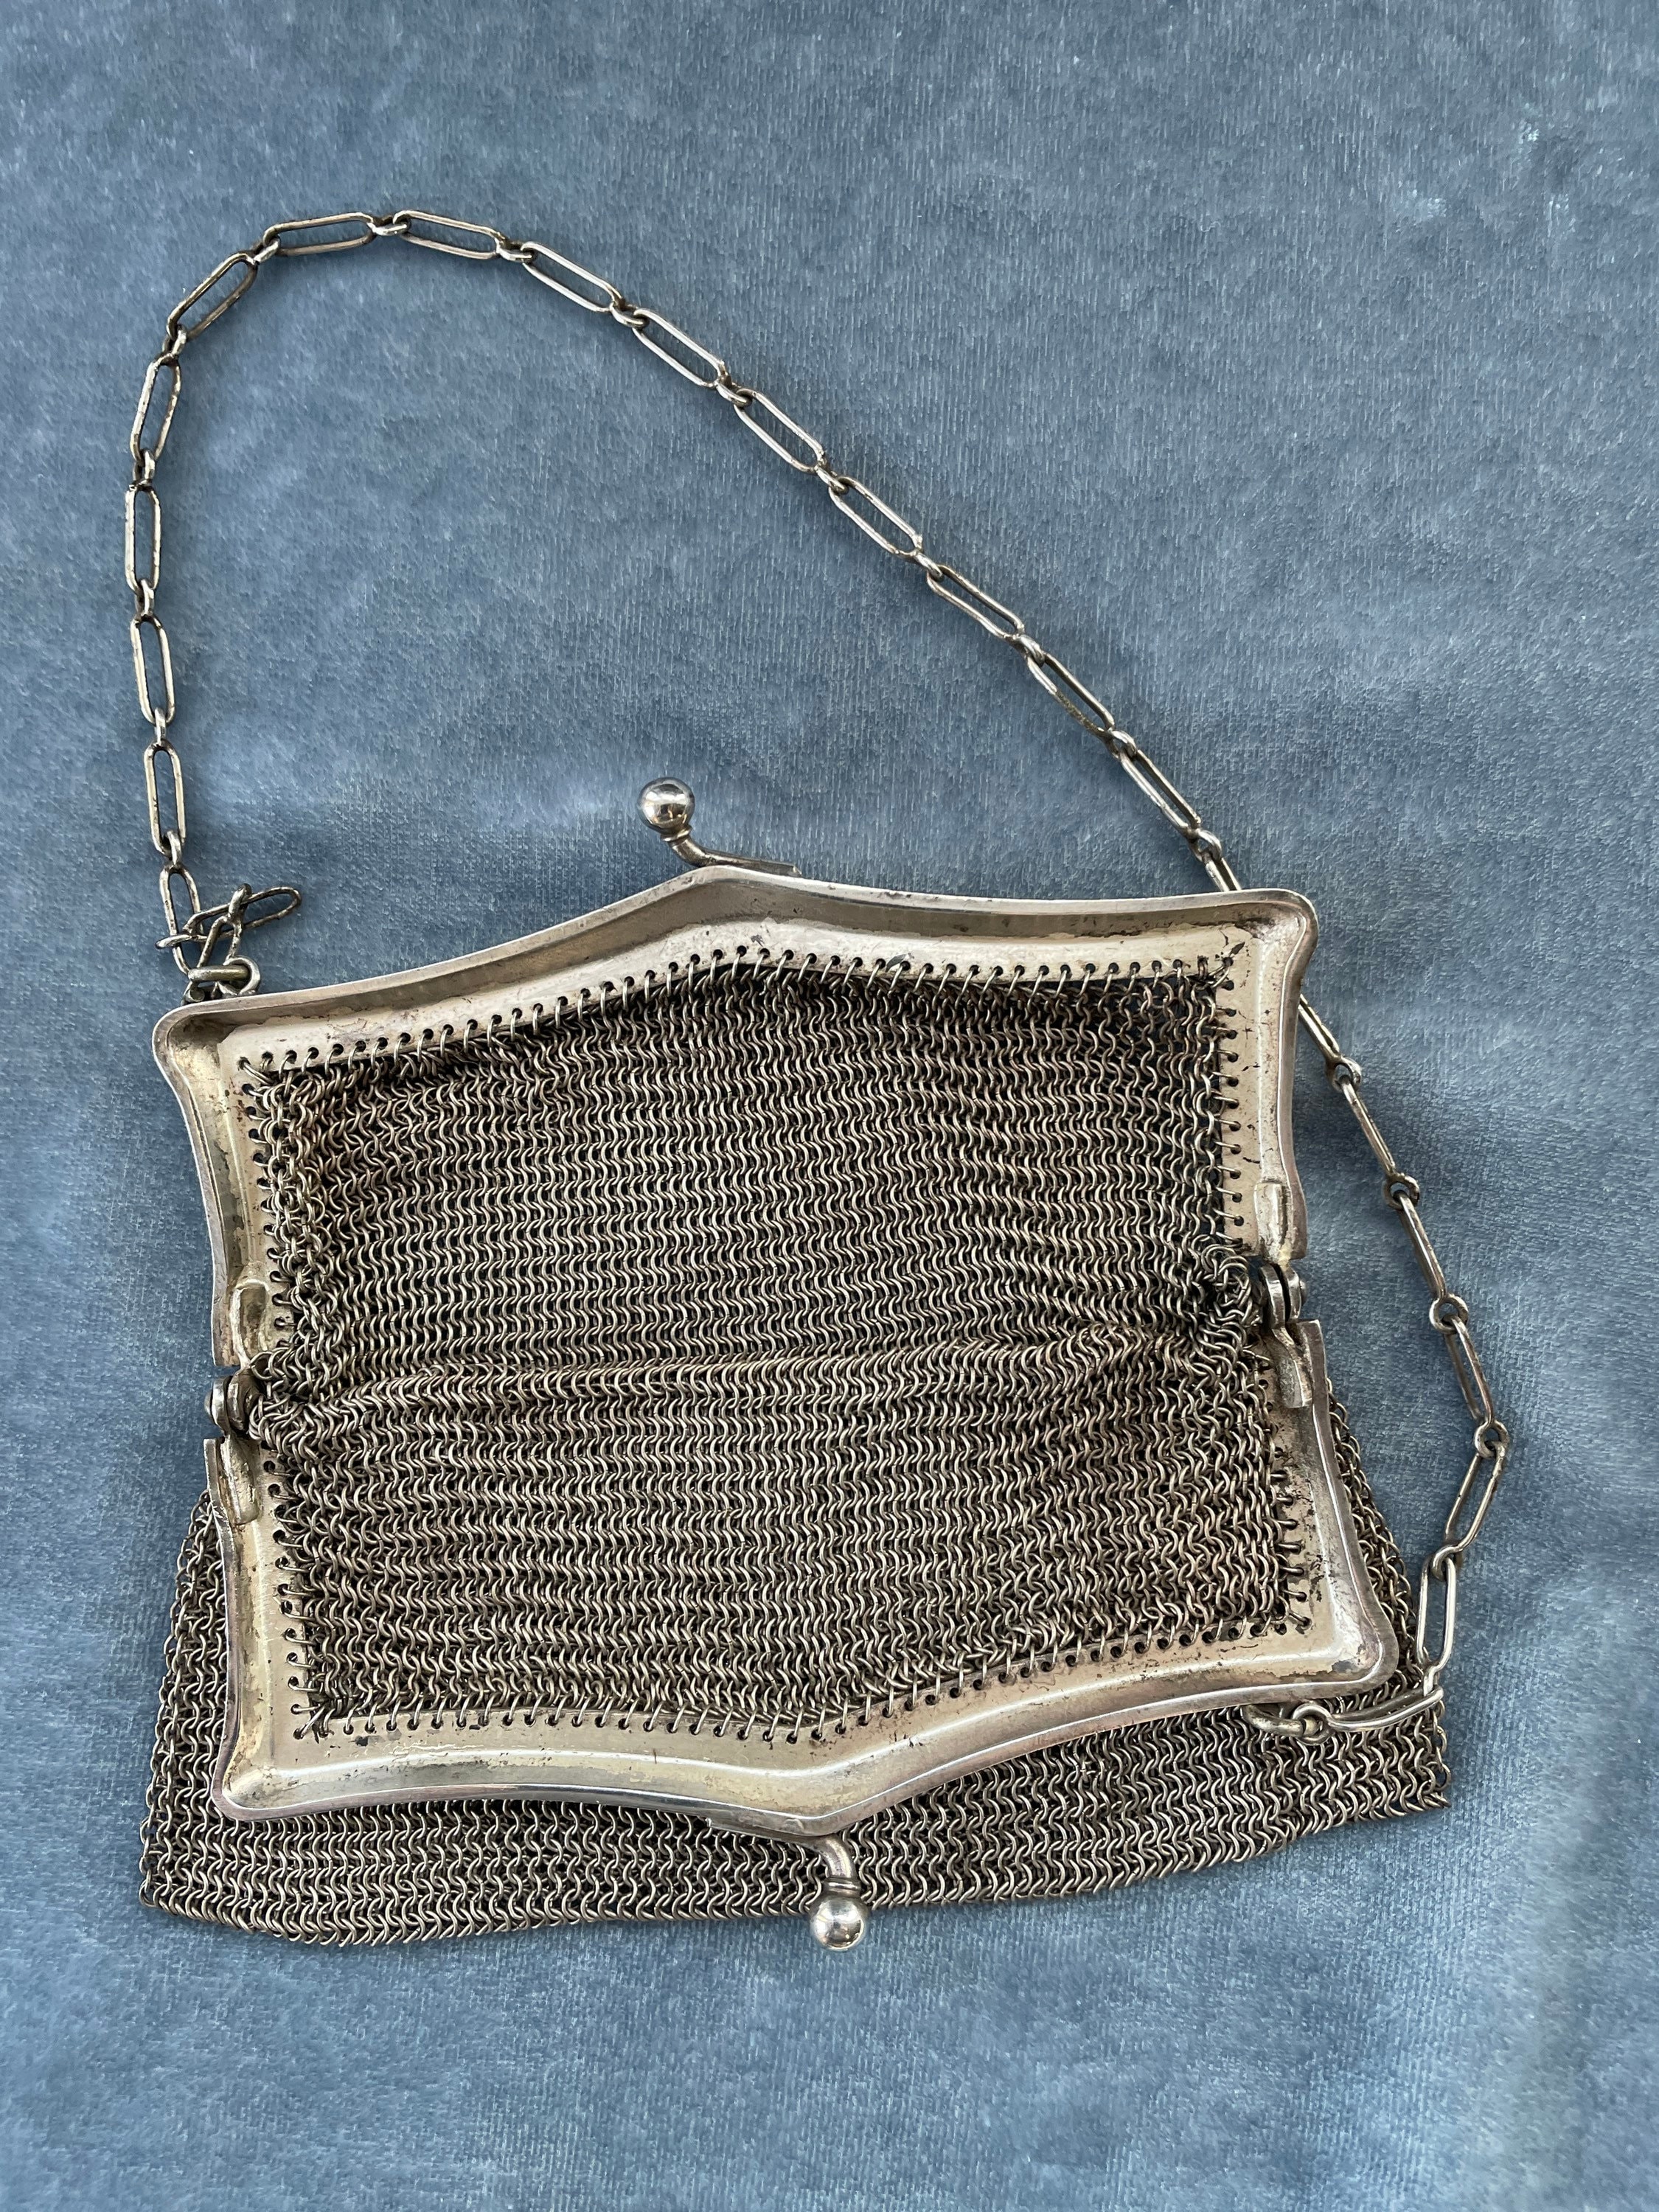 Whiting & Davis Mesh Purses | Antiques & Collectibles - New England